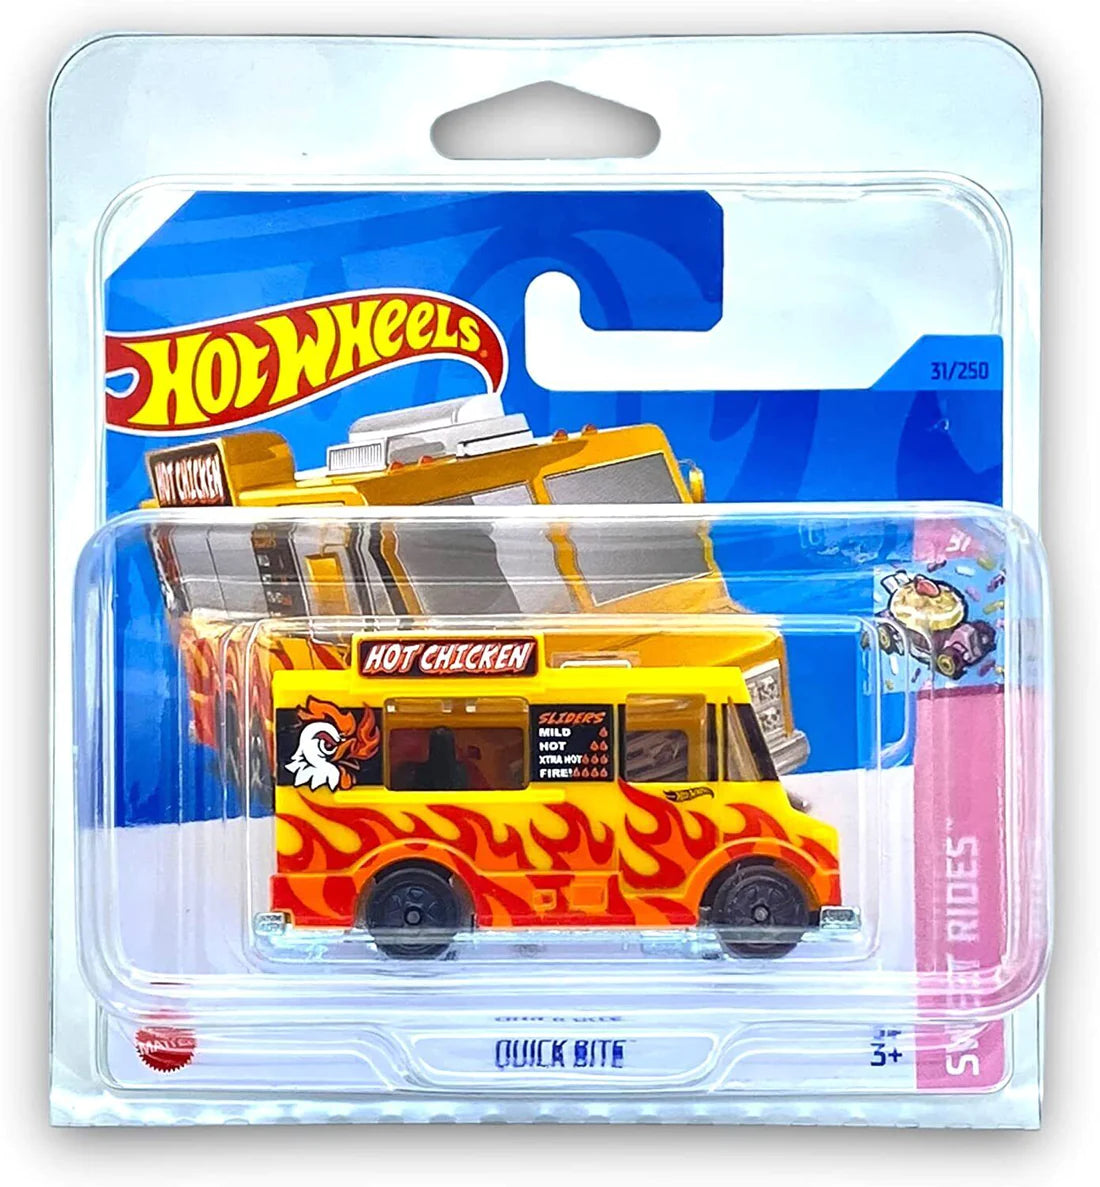 Hot Wheels Die Cast Vehicles Cars Bikes Collection Choose Your Own - QUICK BITE